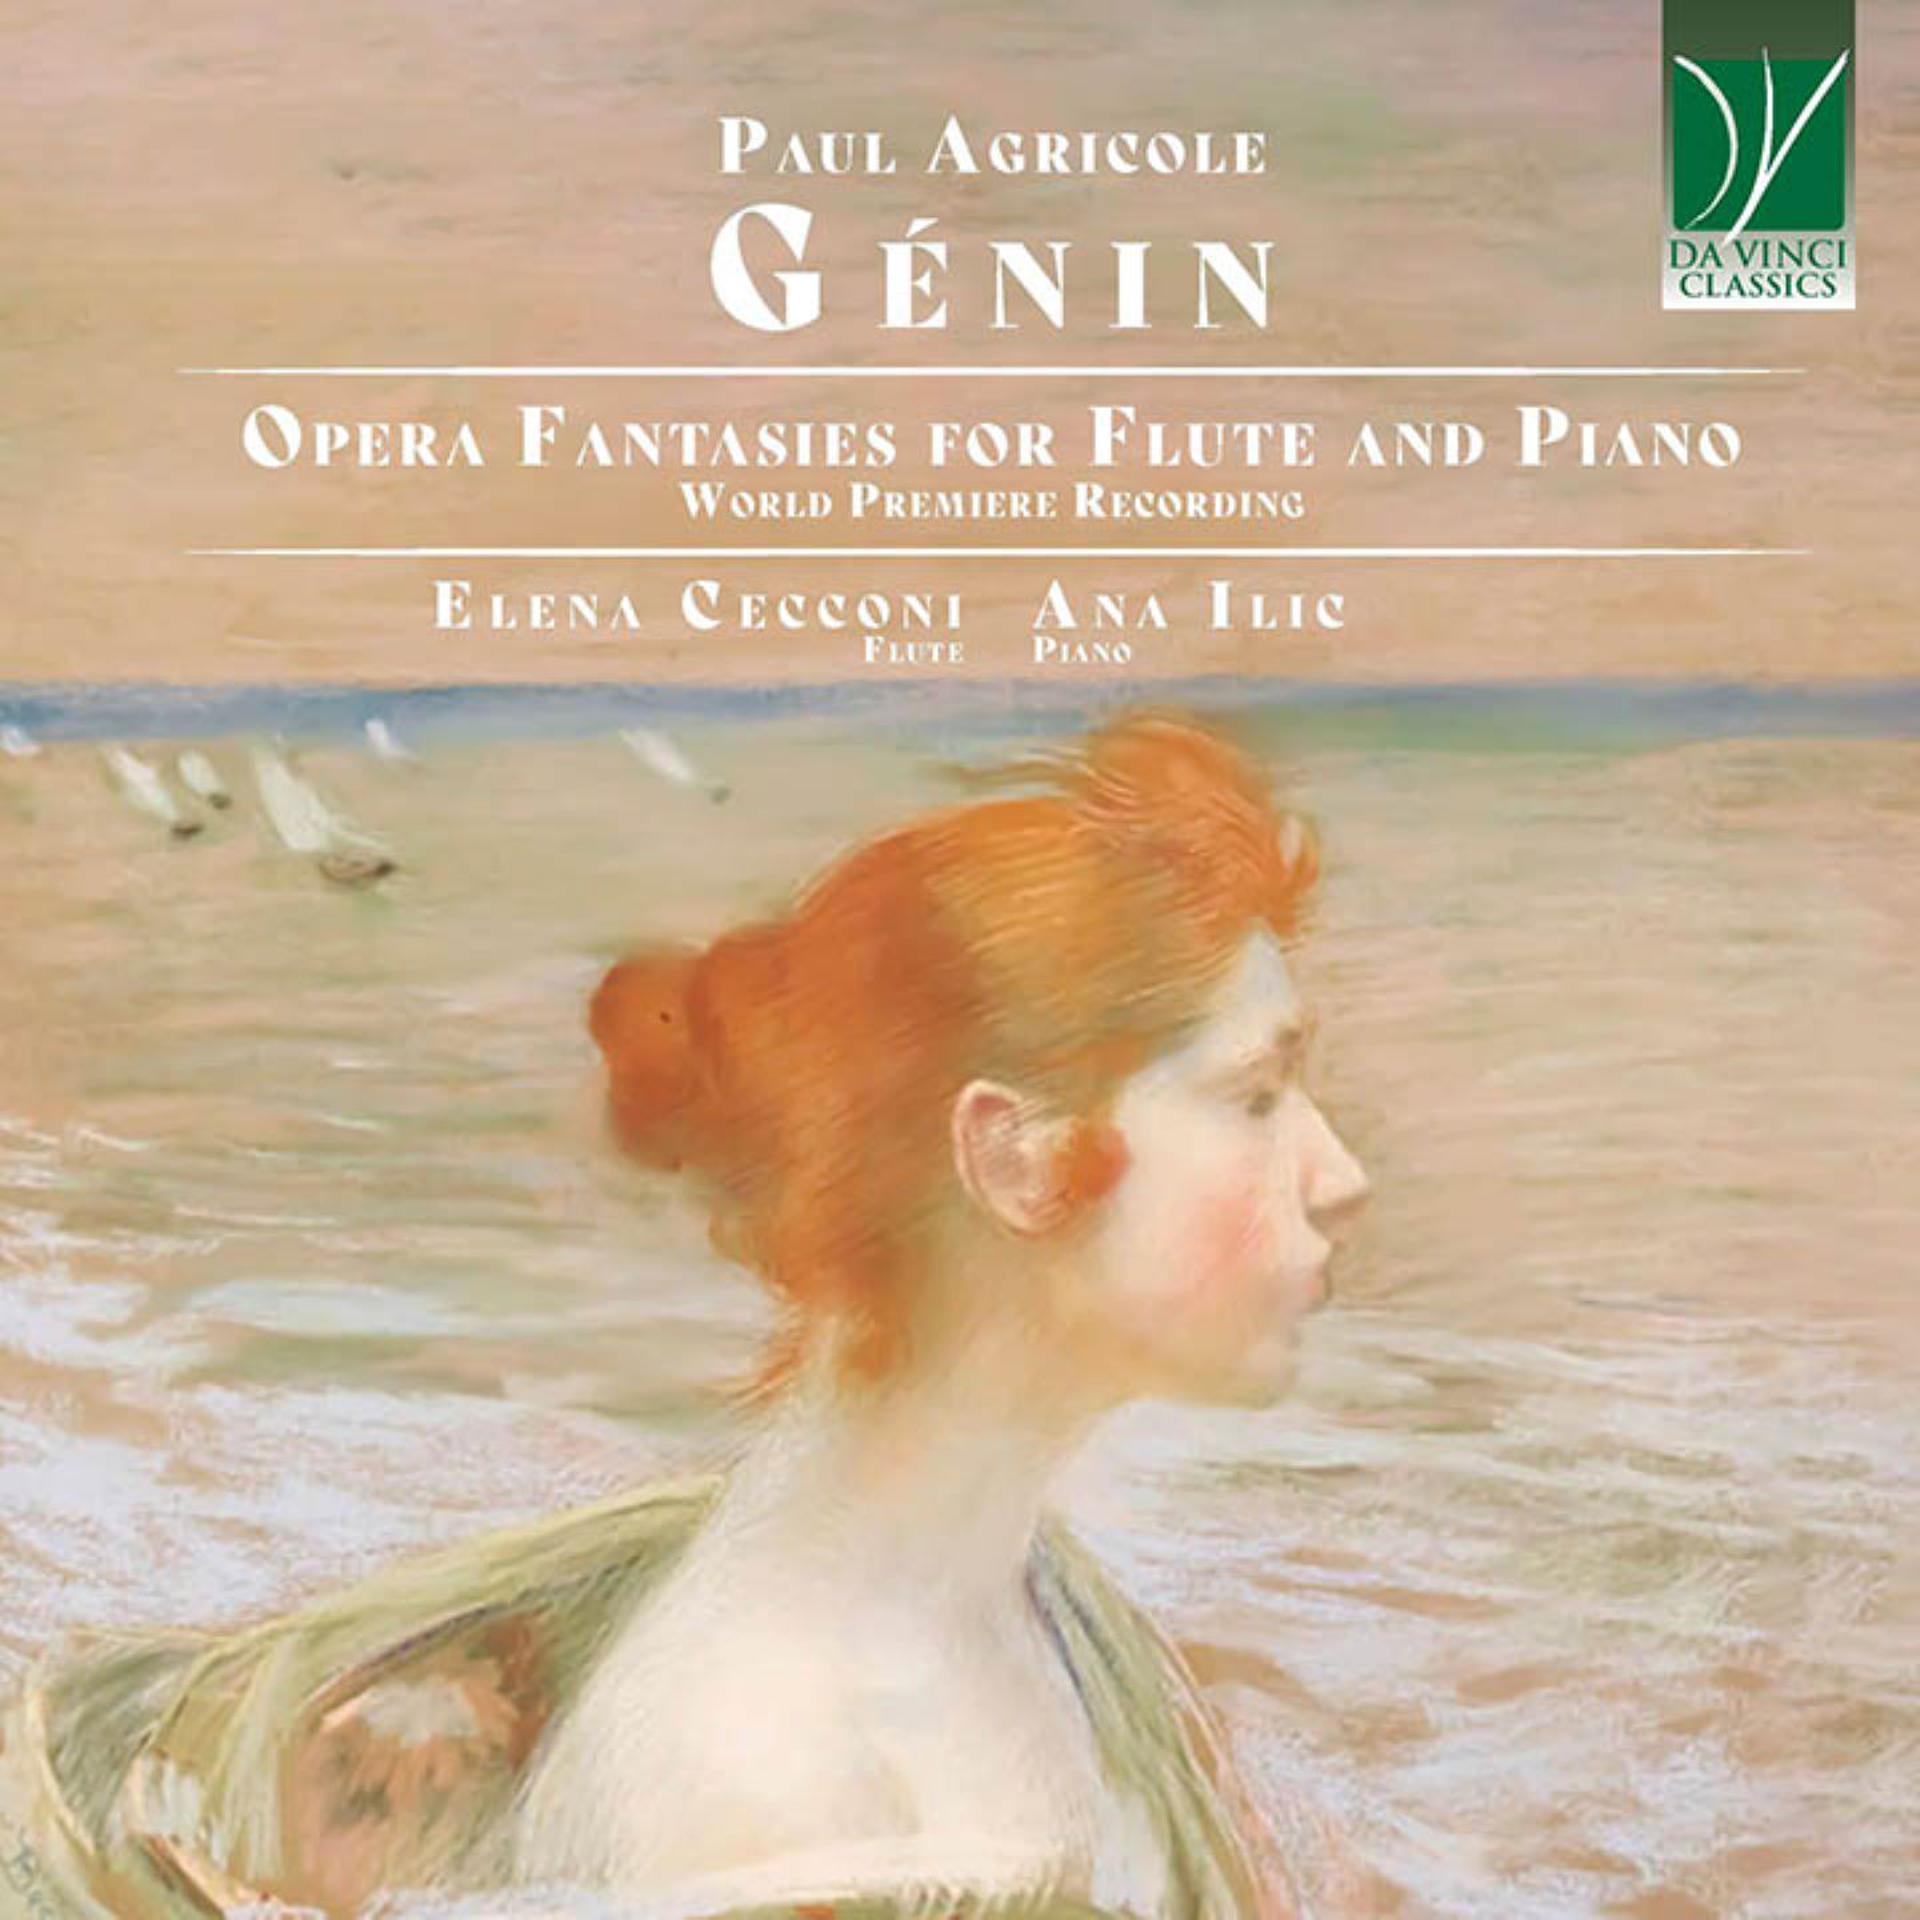 Постер альбома Paul-Agricole Génin: Opera fantasies for Flute and Piano